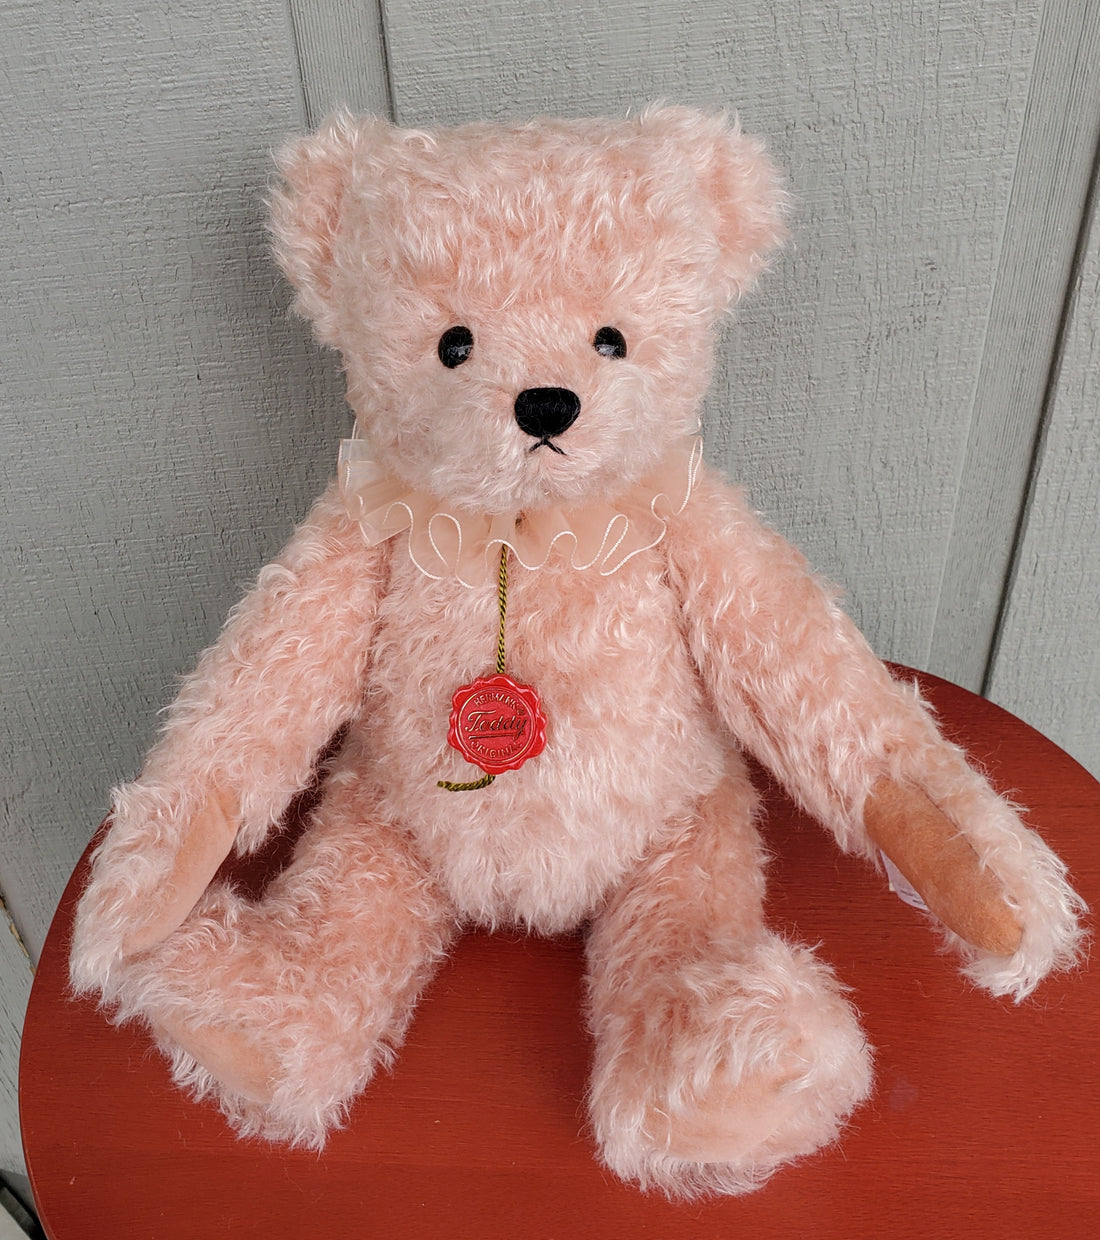 Rosi - 18" Mohair Bear with Growler Sound by Teddy Hermann, #30 of 100 Made!